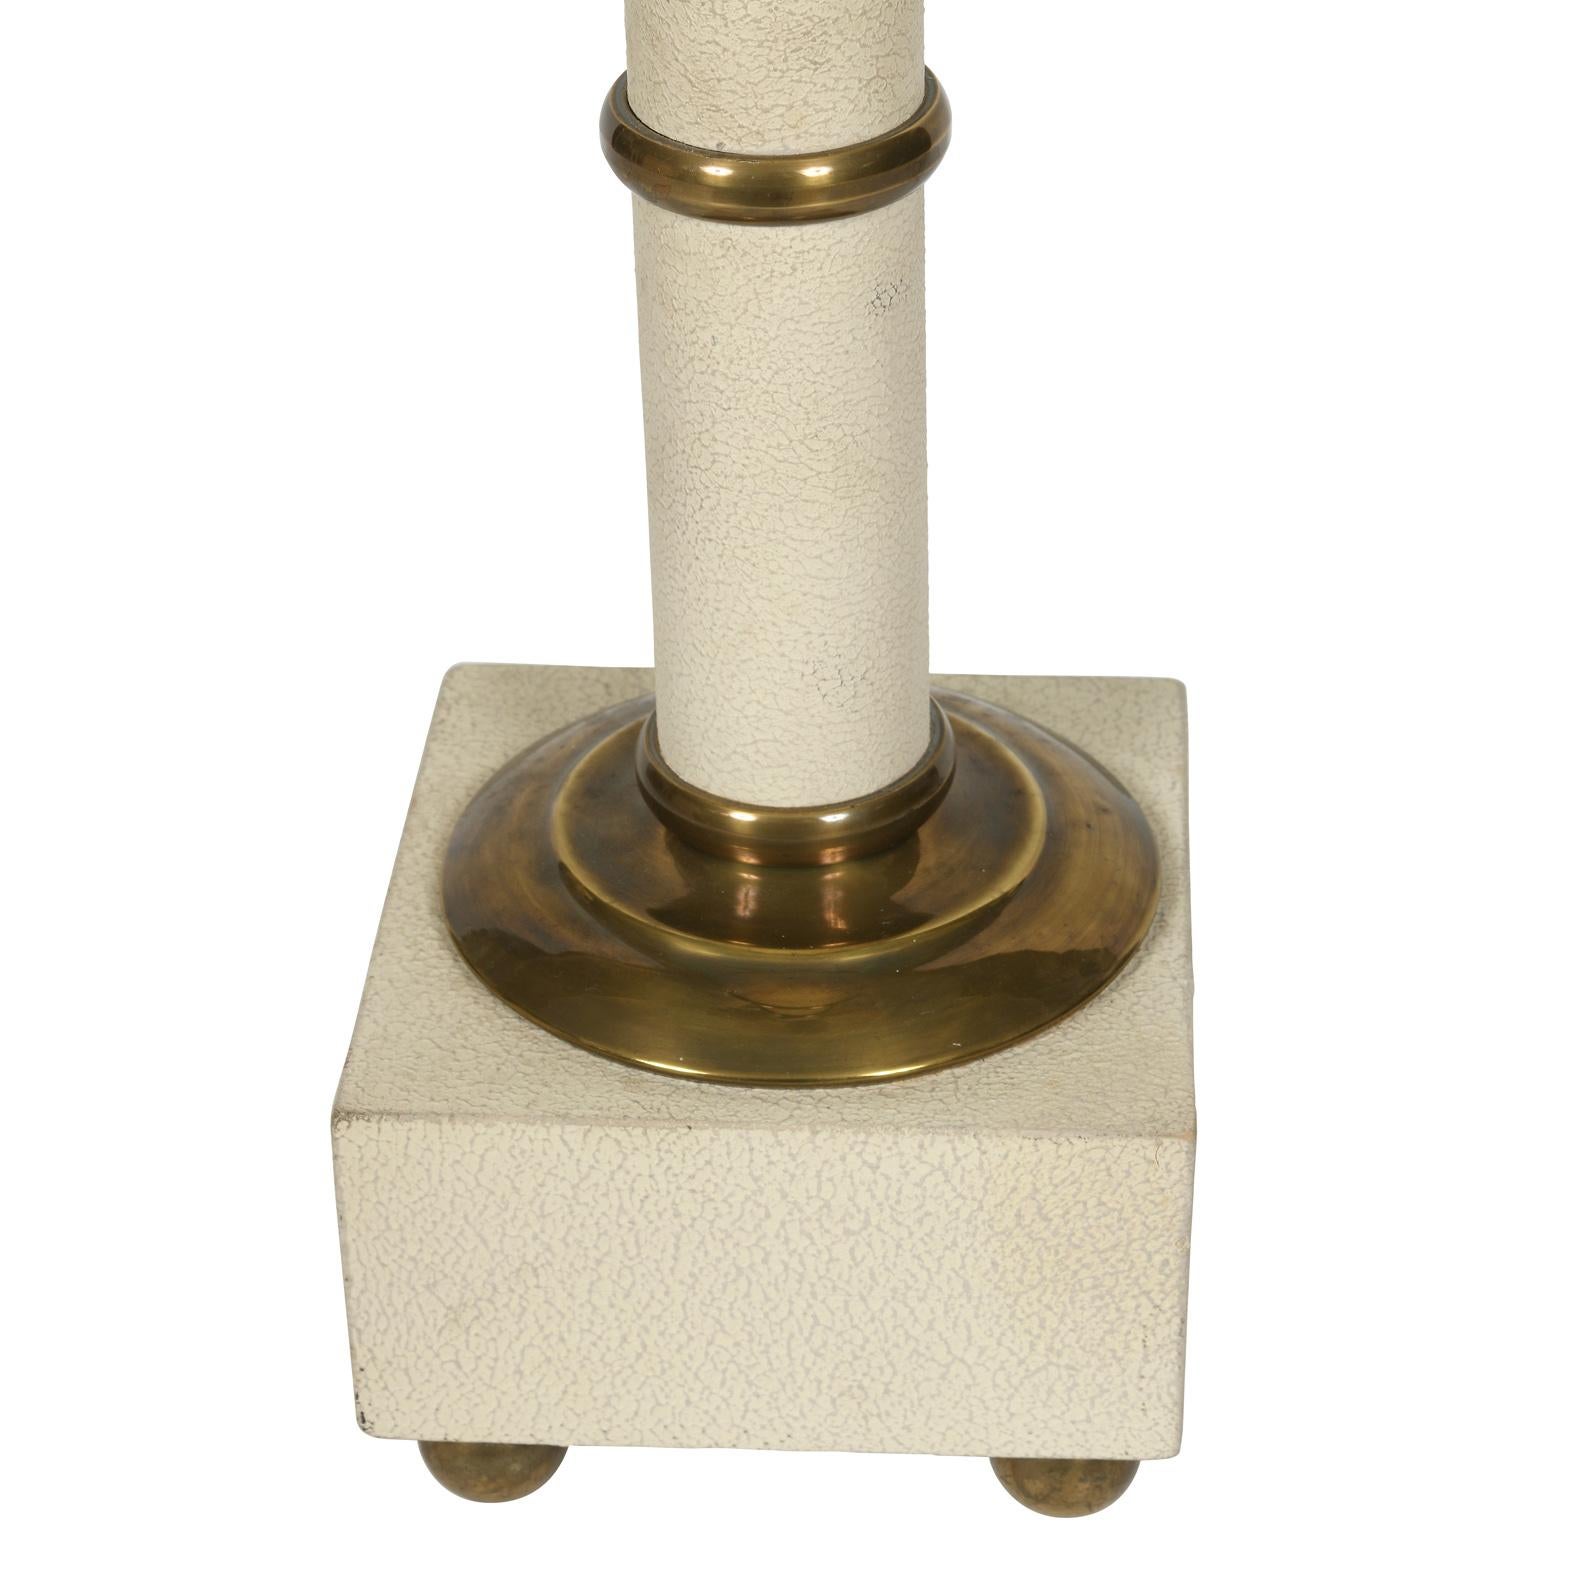 Vintage Maison Charles ivory palm motif lamp with brass details, square base sits on four round brass feet. Measures 26